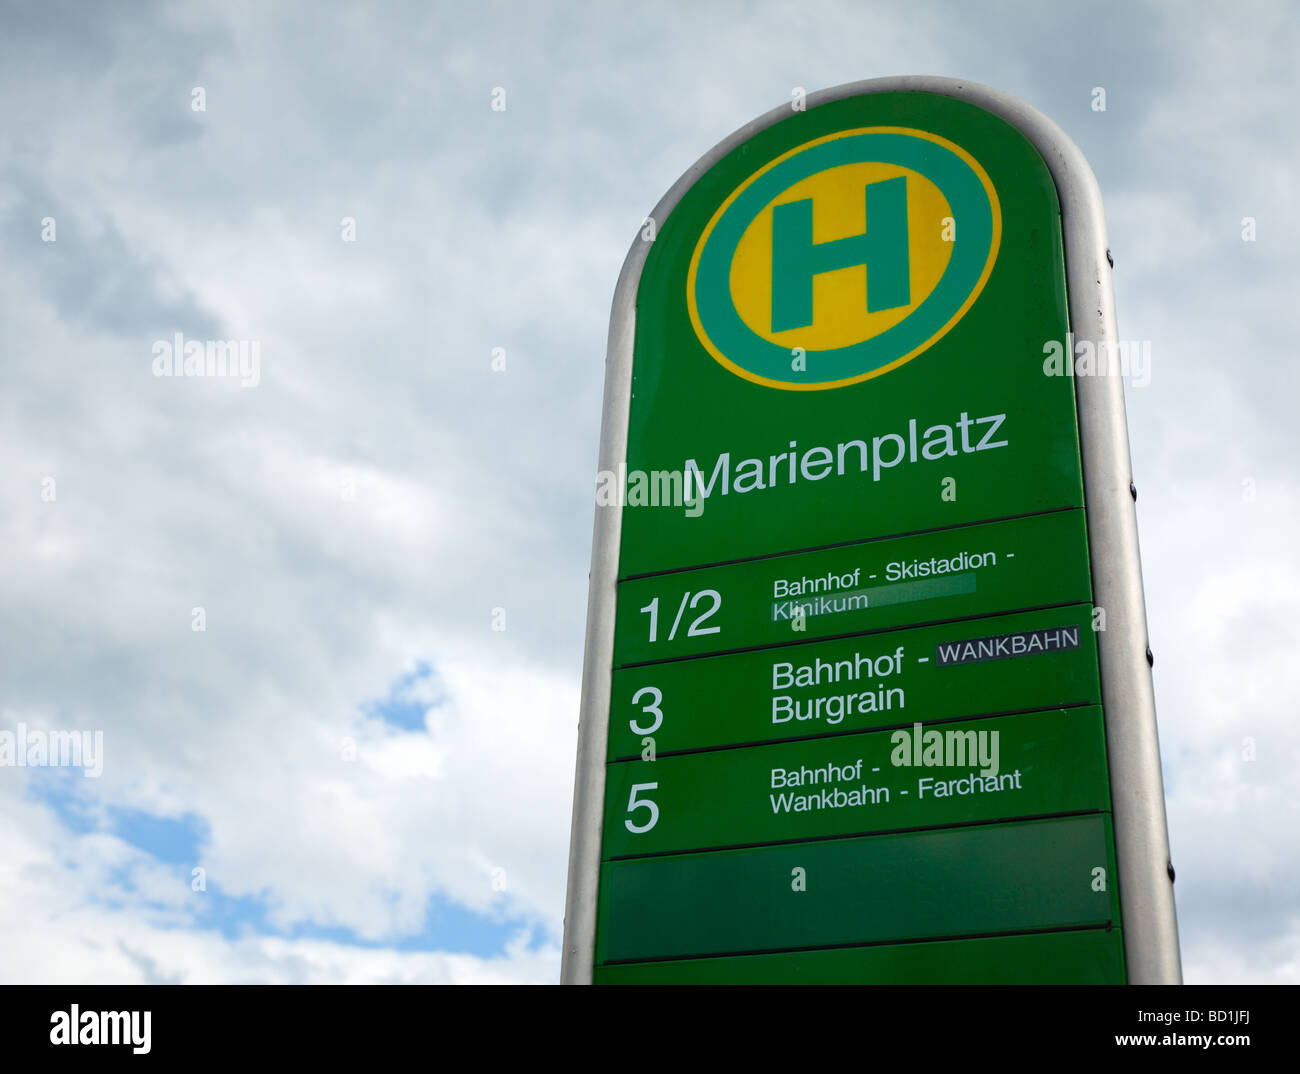 Germany Europe - bus stop sign with information Stock Photo